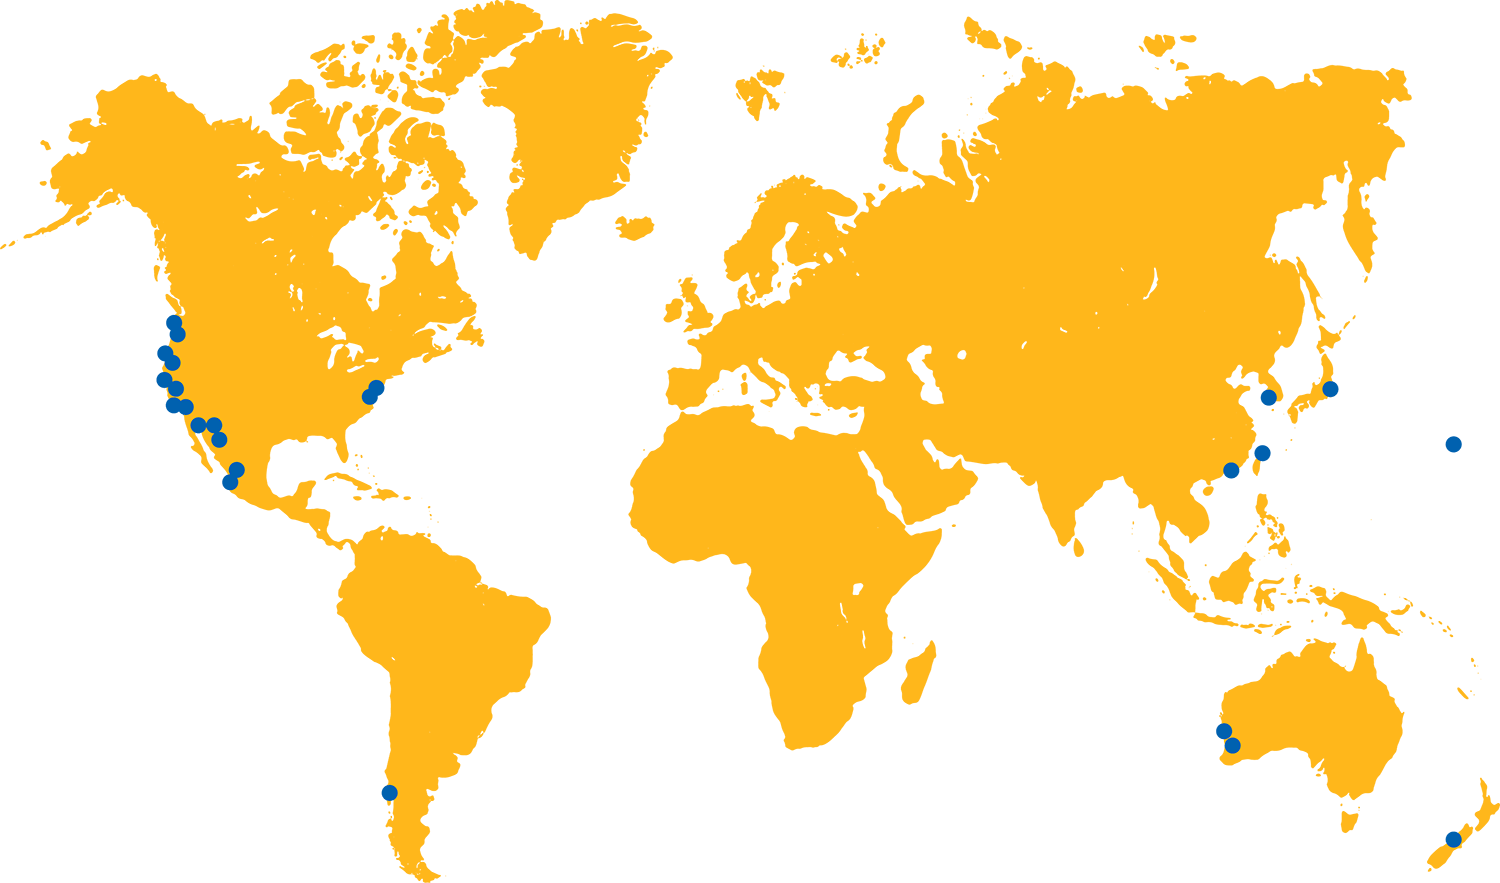 A global map shows locations of various PXiSE projects.